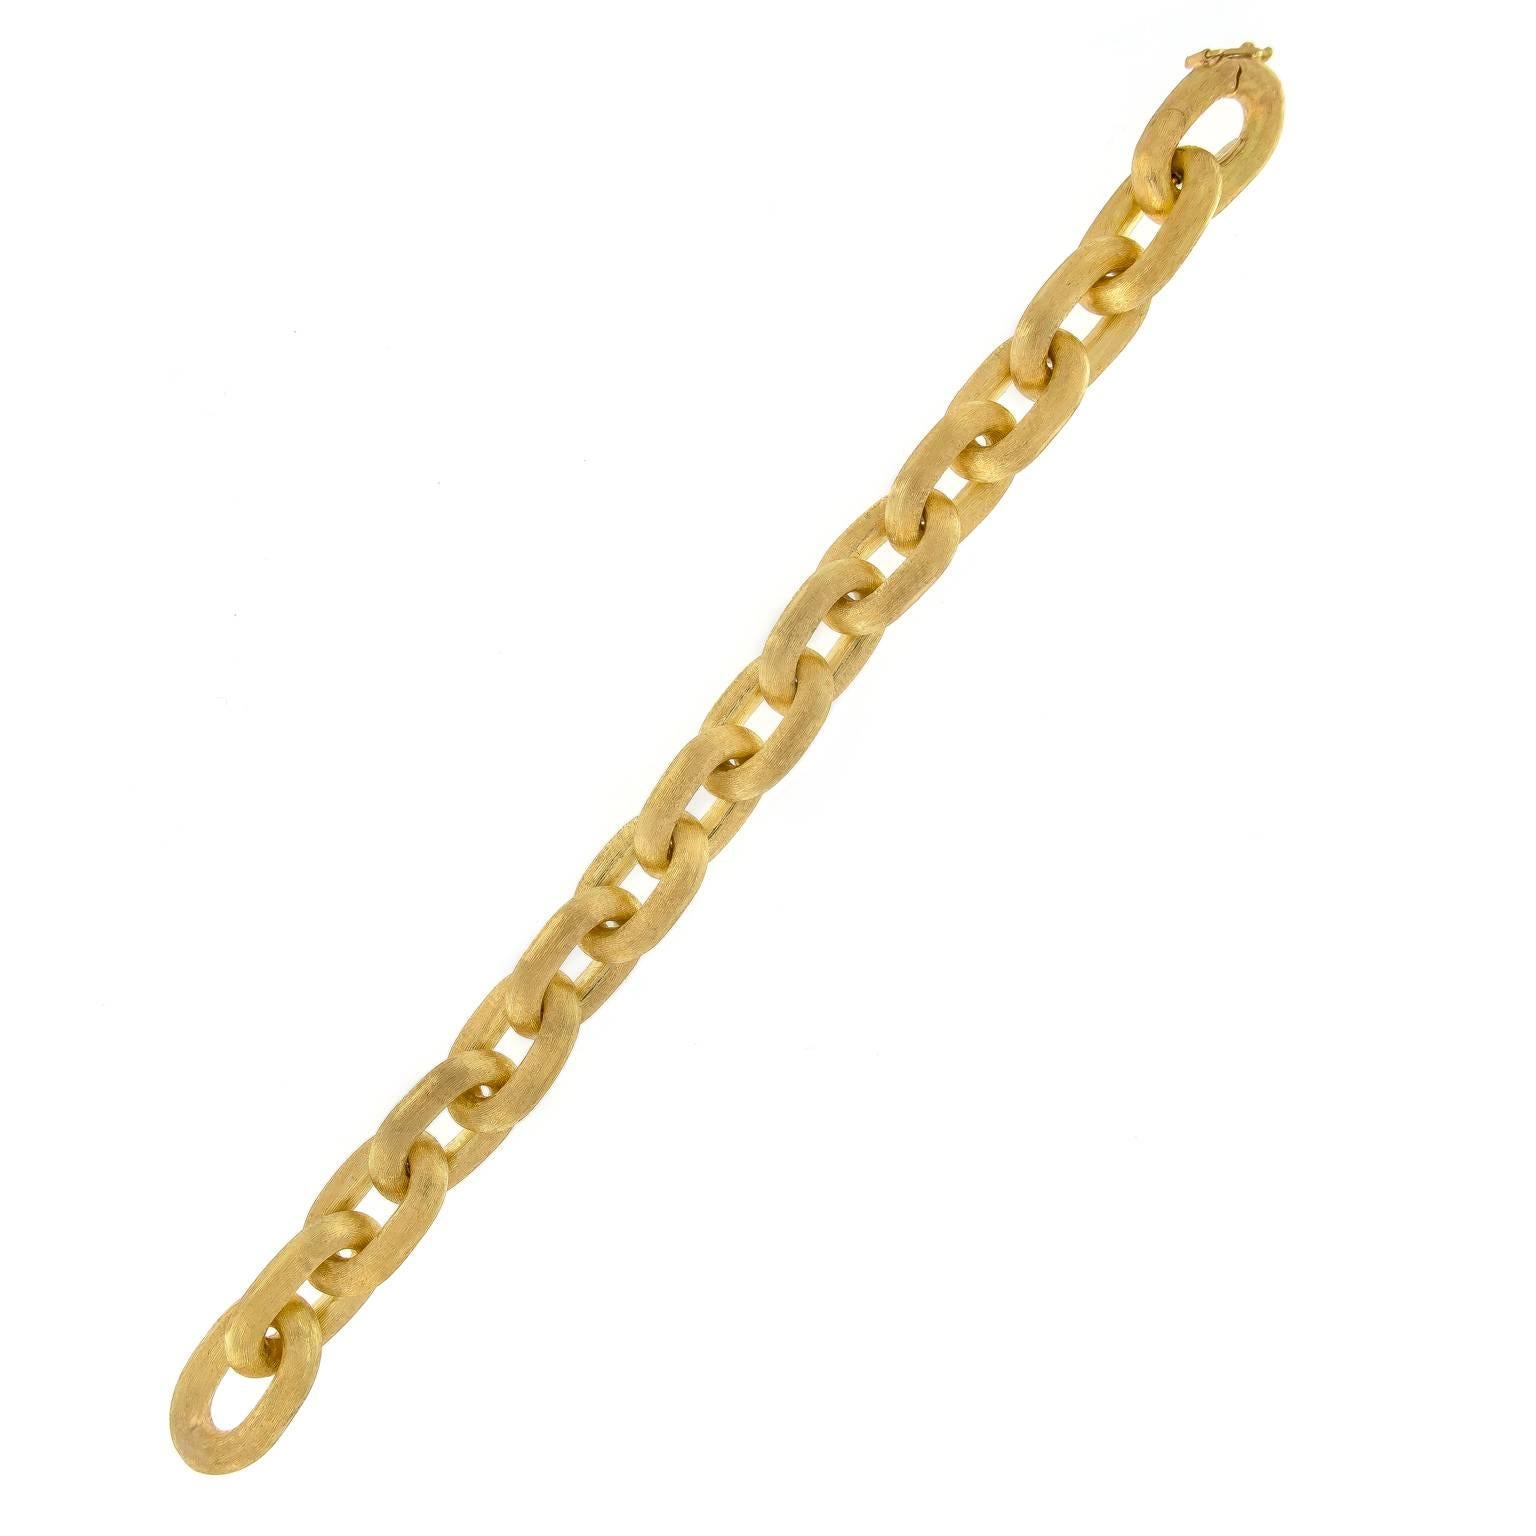 Sophisticated and yet perfectly chunky, this gold bracelet is bold enough to draw compliments but subtle enough for everyday wear. Oval links are crafted in 18k yellow gold featuring aa expertly hand-engraved Florentine finish similar to spun gold.